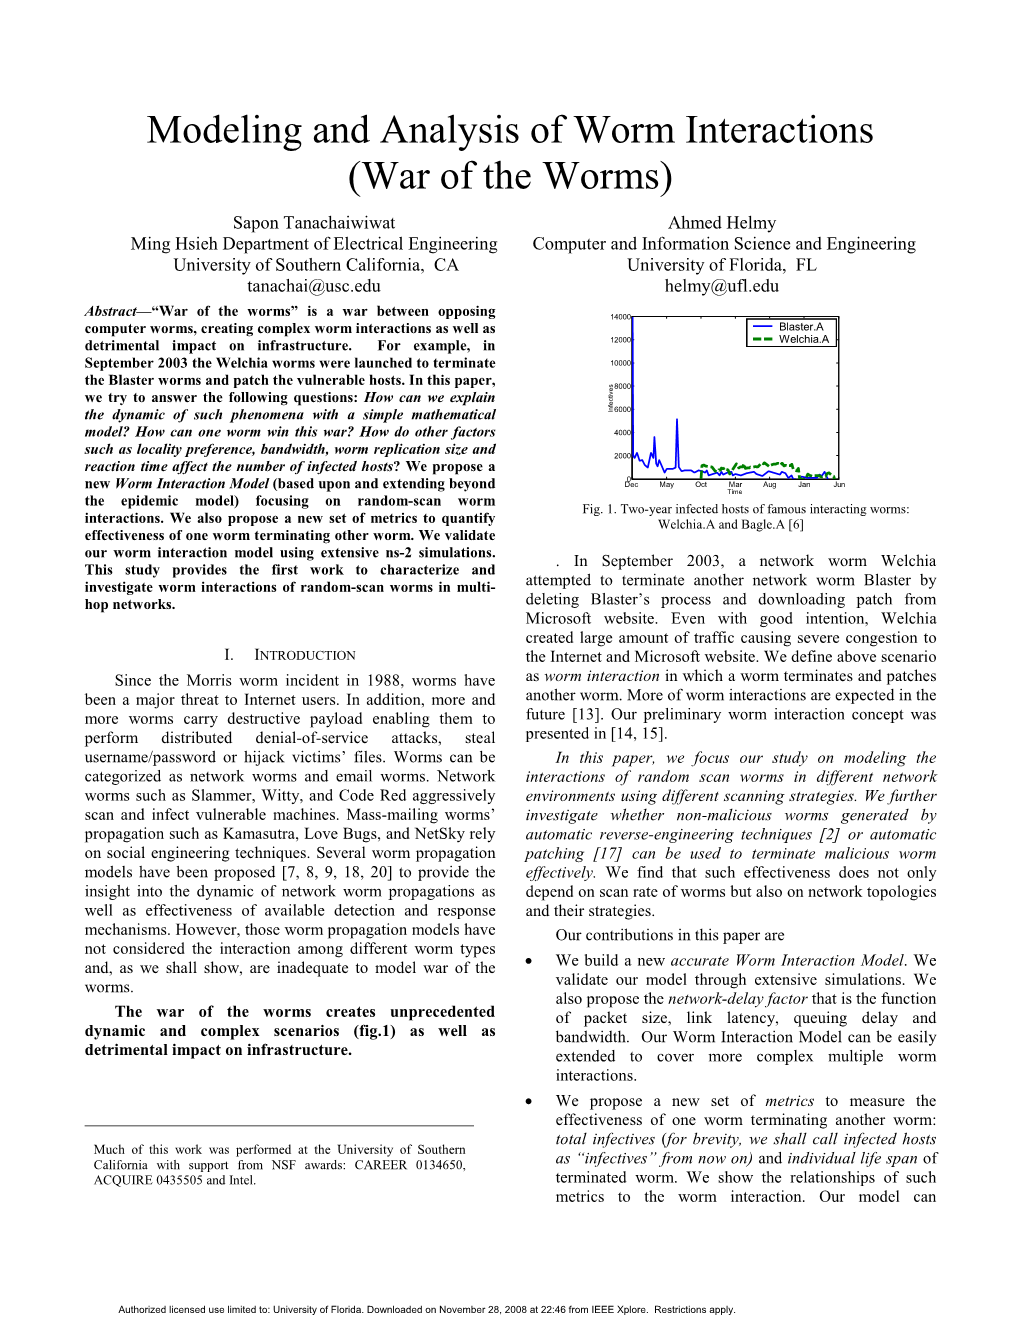 Modeling and Analysis of Worm Interactions (War of the Worms)